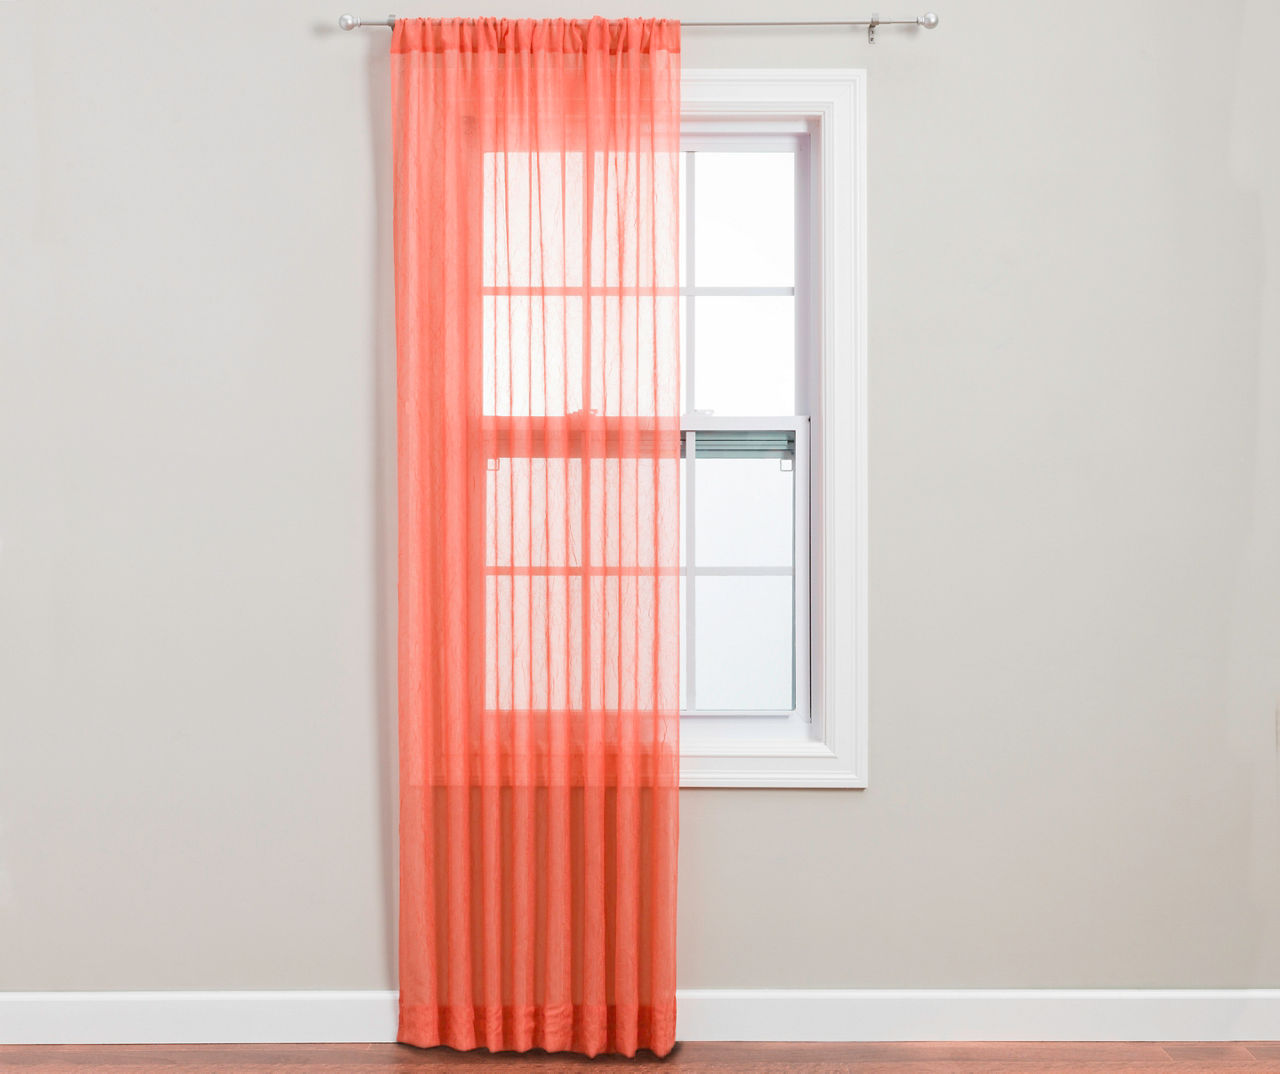 84" Coral Crushed Voile Sheer Panel